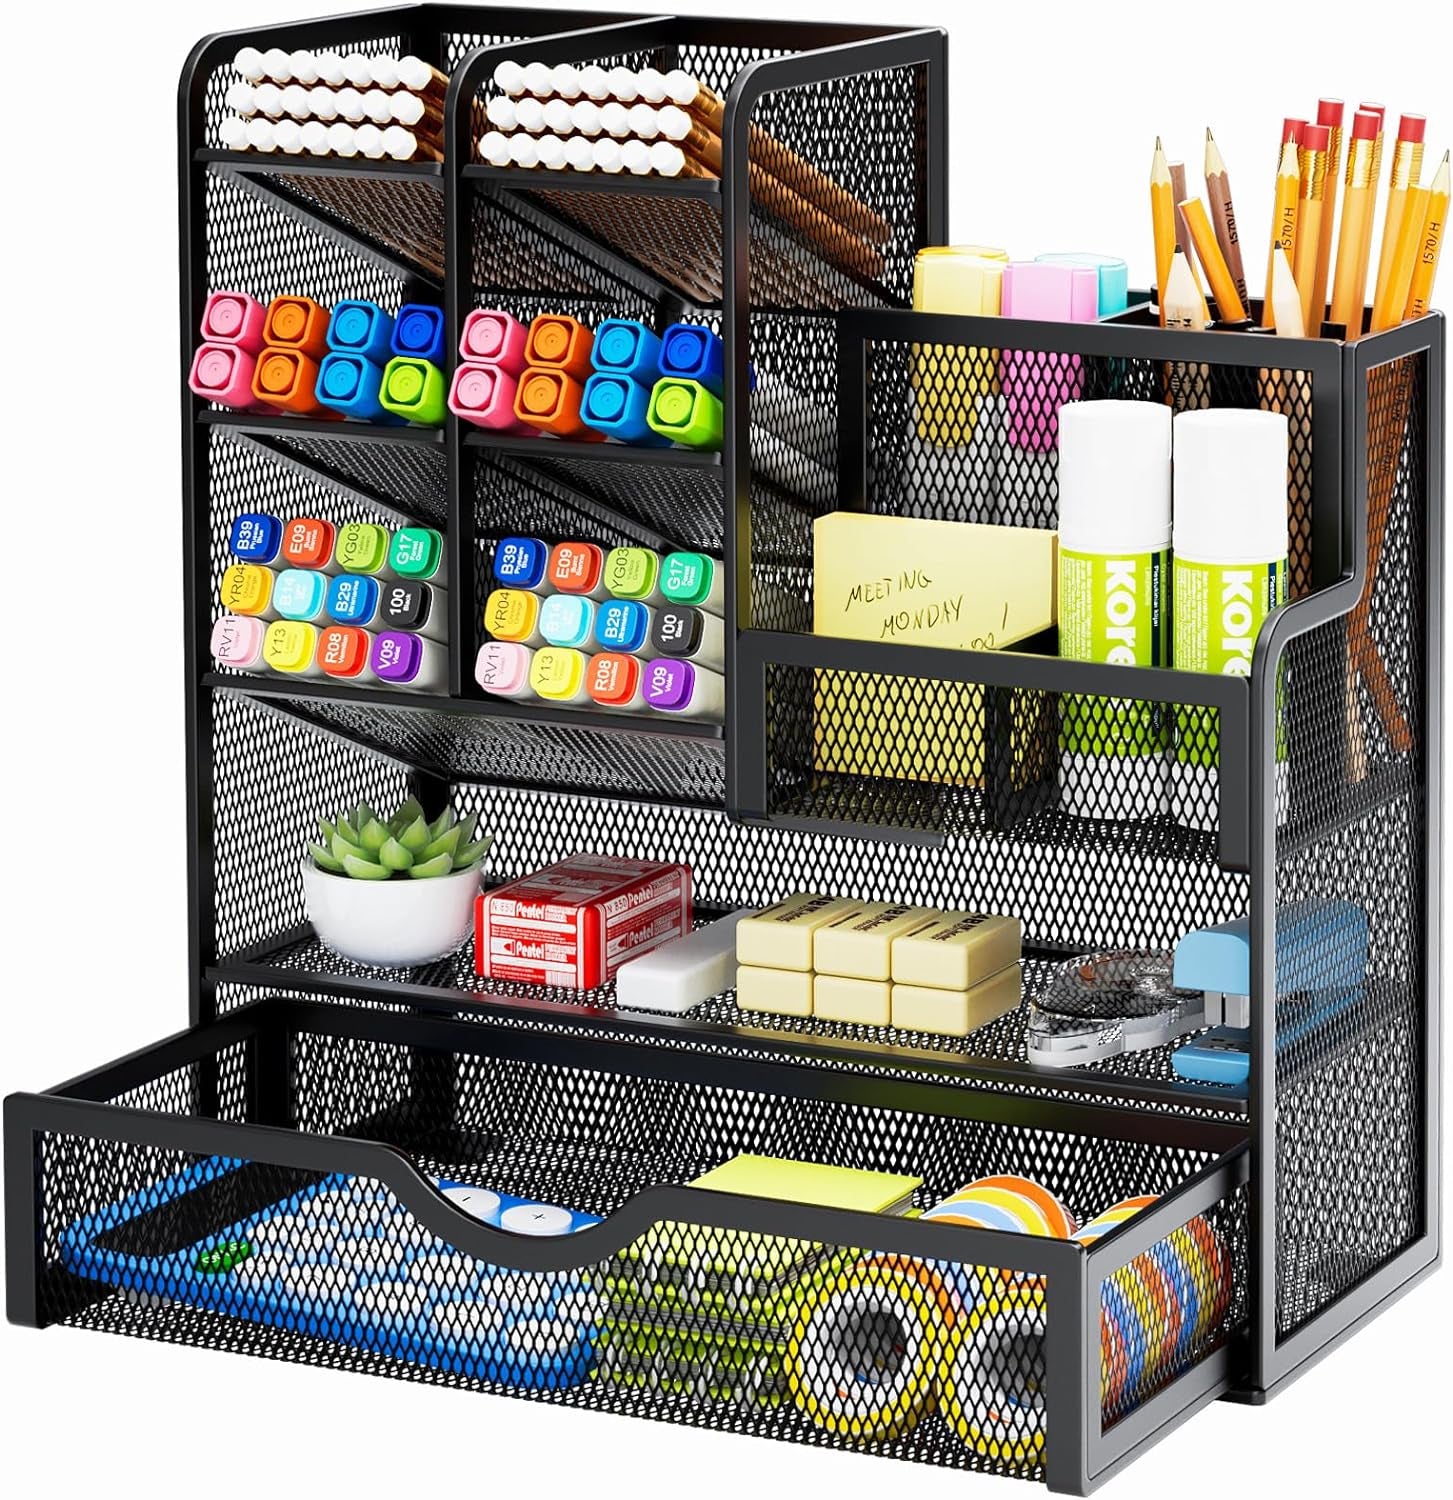 Mesh Pen Holder for Desk, Desk Organizer with Drawer, Multi-Functional Pencil Organizer, Desk Organizers and Accessories for Office Art Supplies (Black)